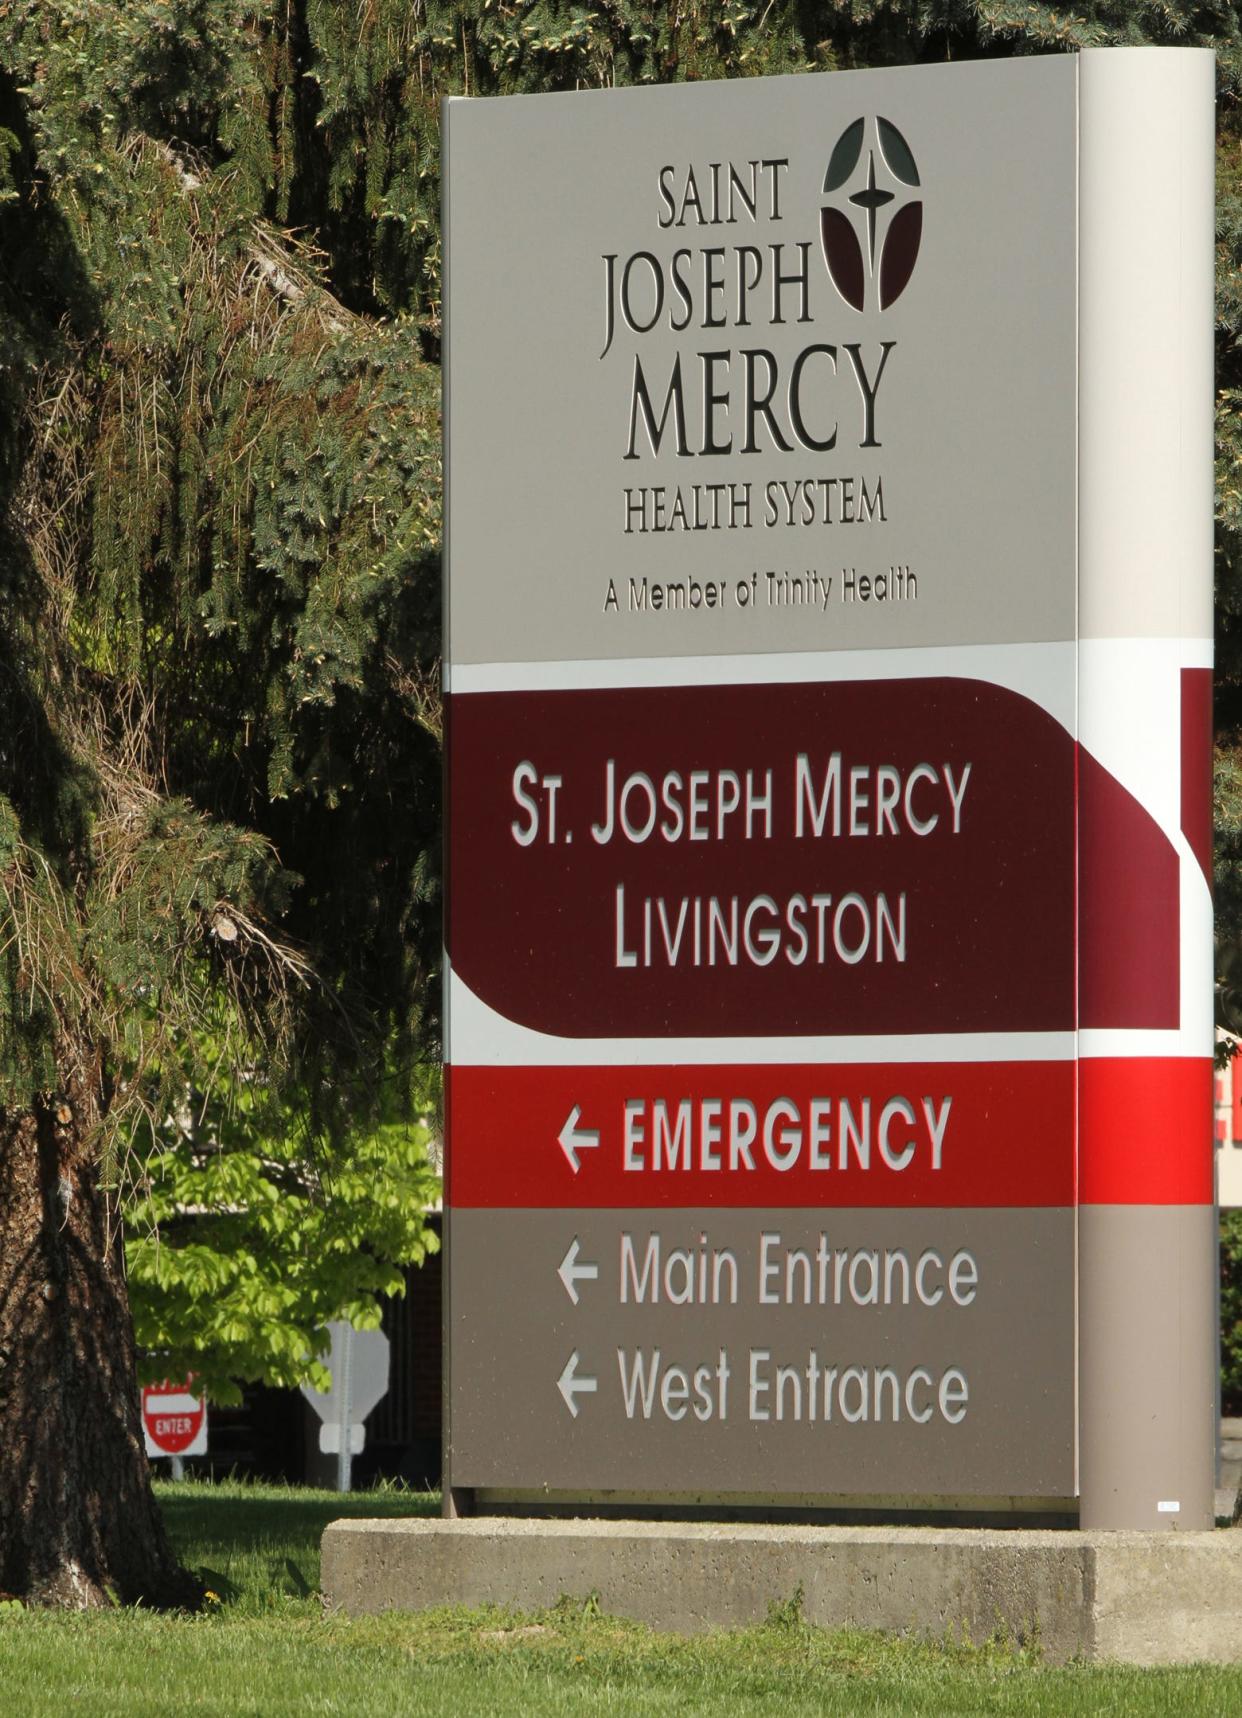 St. Joseph Mercy Livingston Hospital in Howell is experiencing a surge in COVID-19 patients.